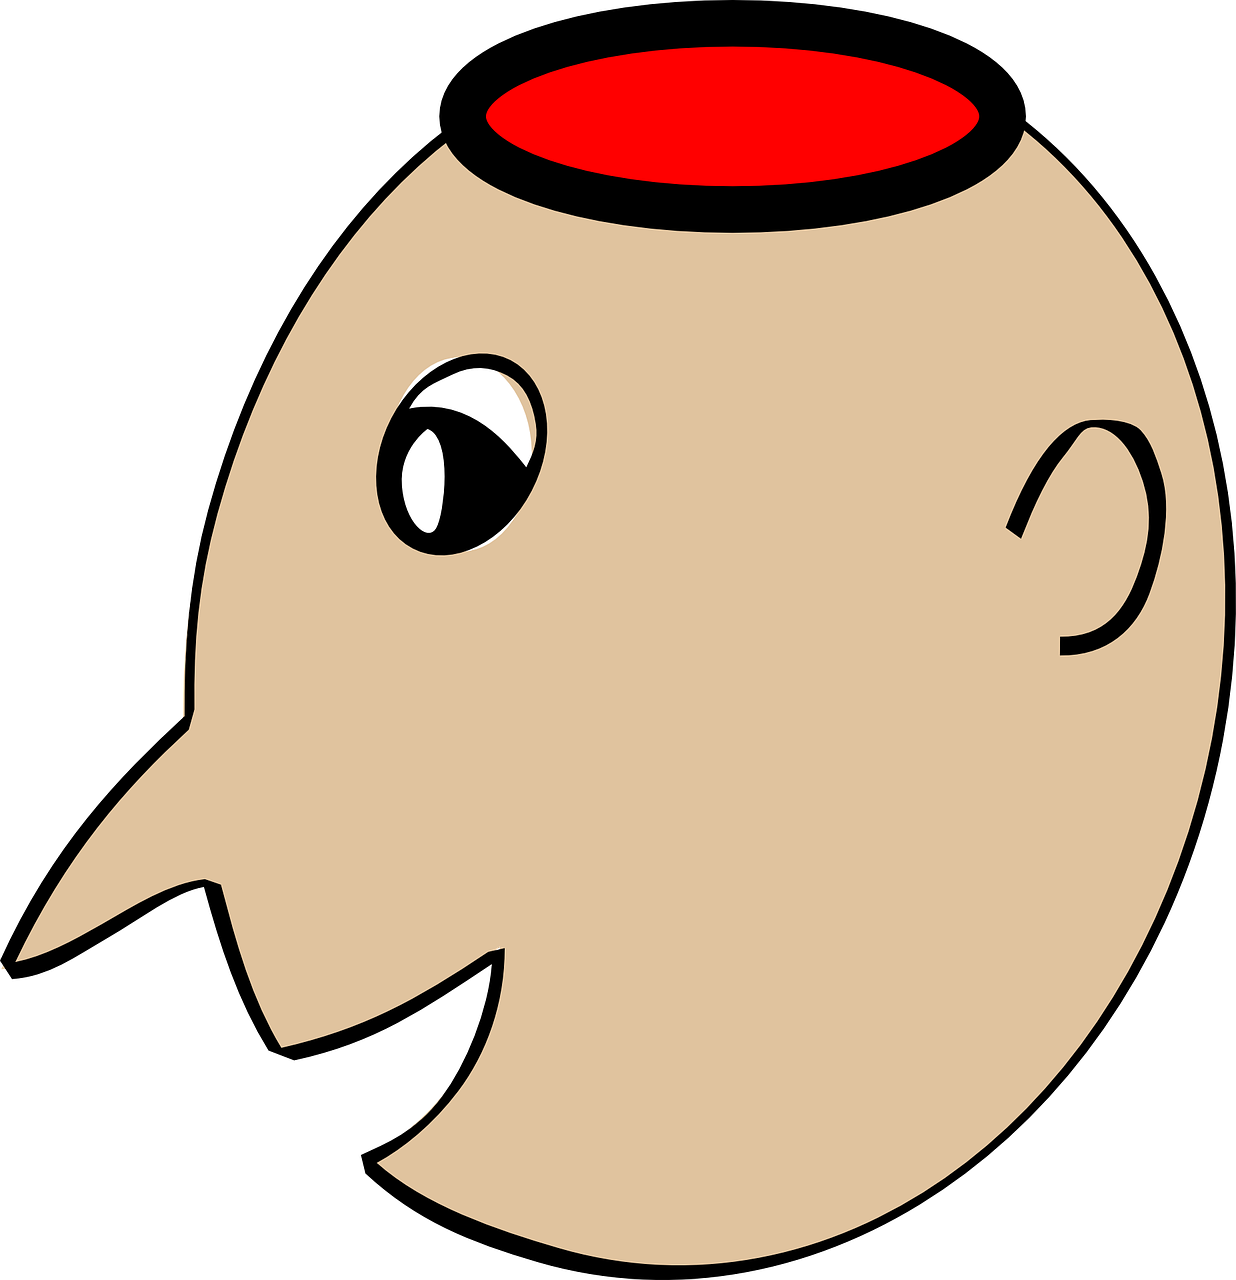 A Cartoon Head With A Red Hat